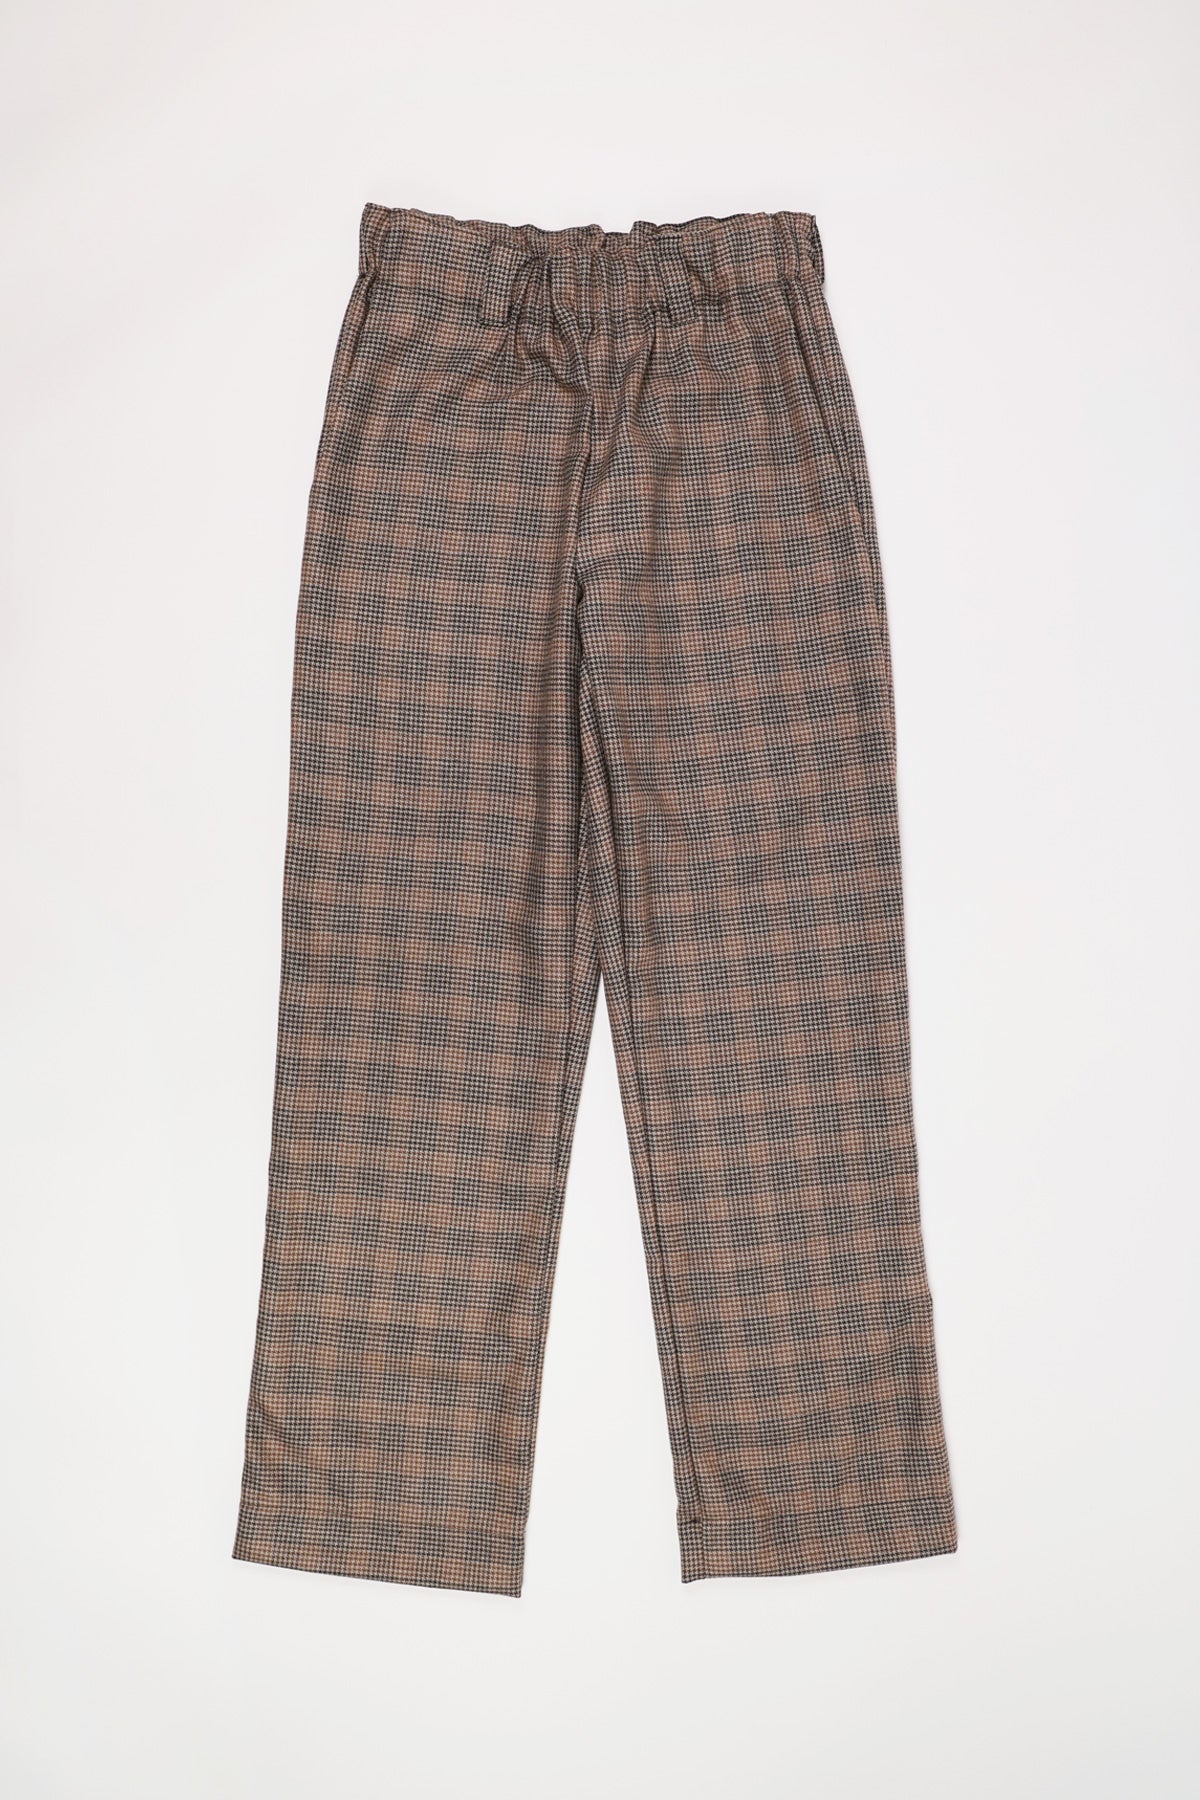 William Frederick - House Pant - Brown and Tan Hounstooth Plaid - Canoe Club